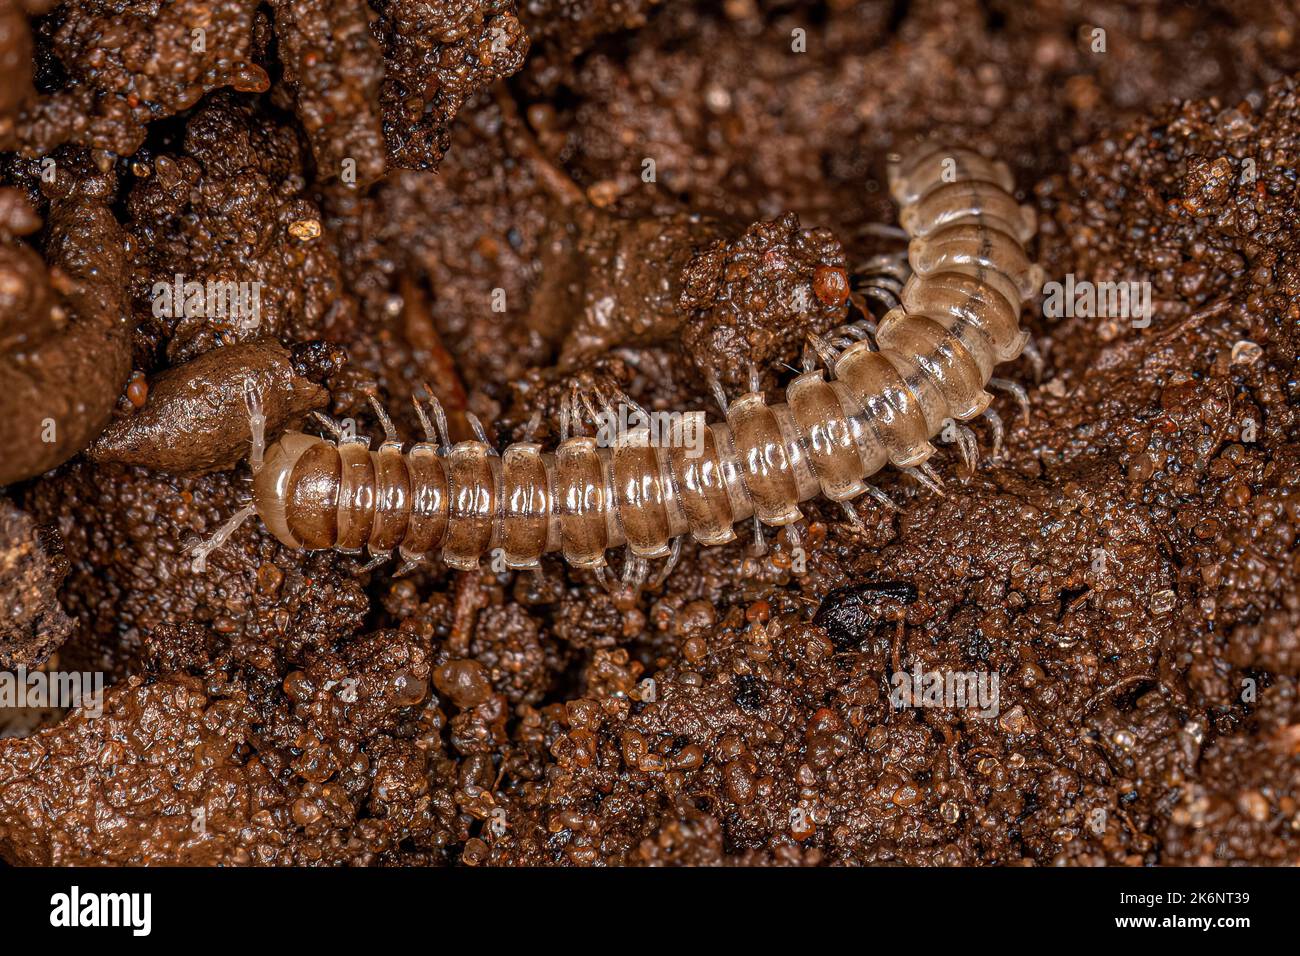 Small Long flange Millipede of the Family Paradoxosomatidae Stock Photo